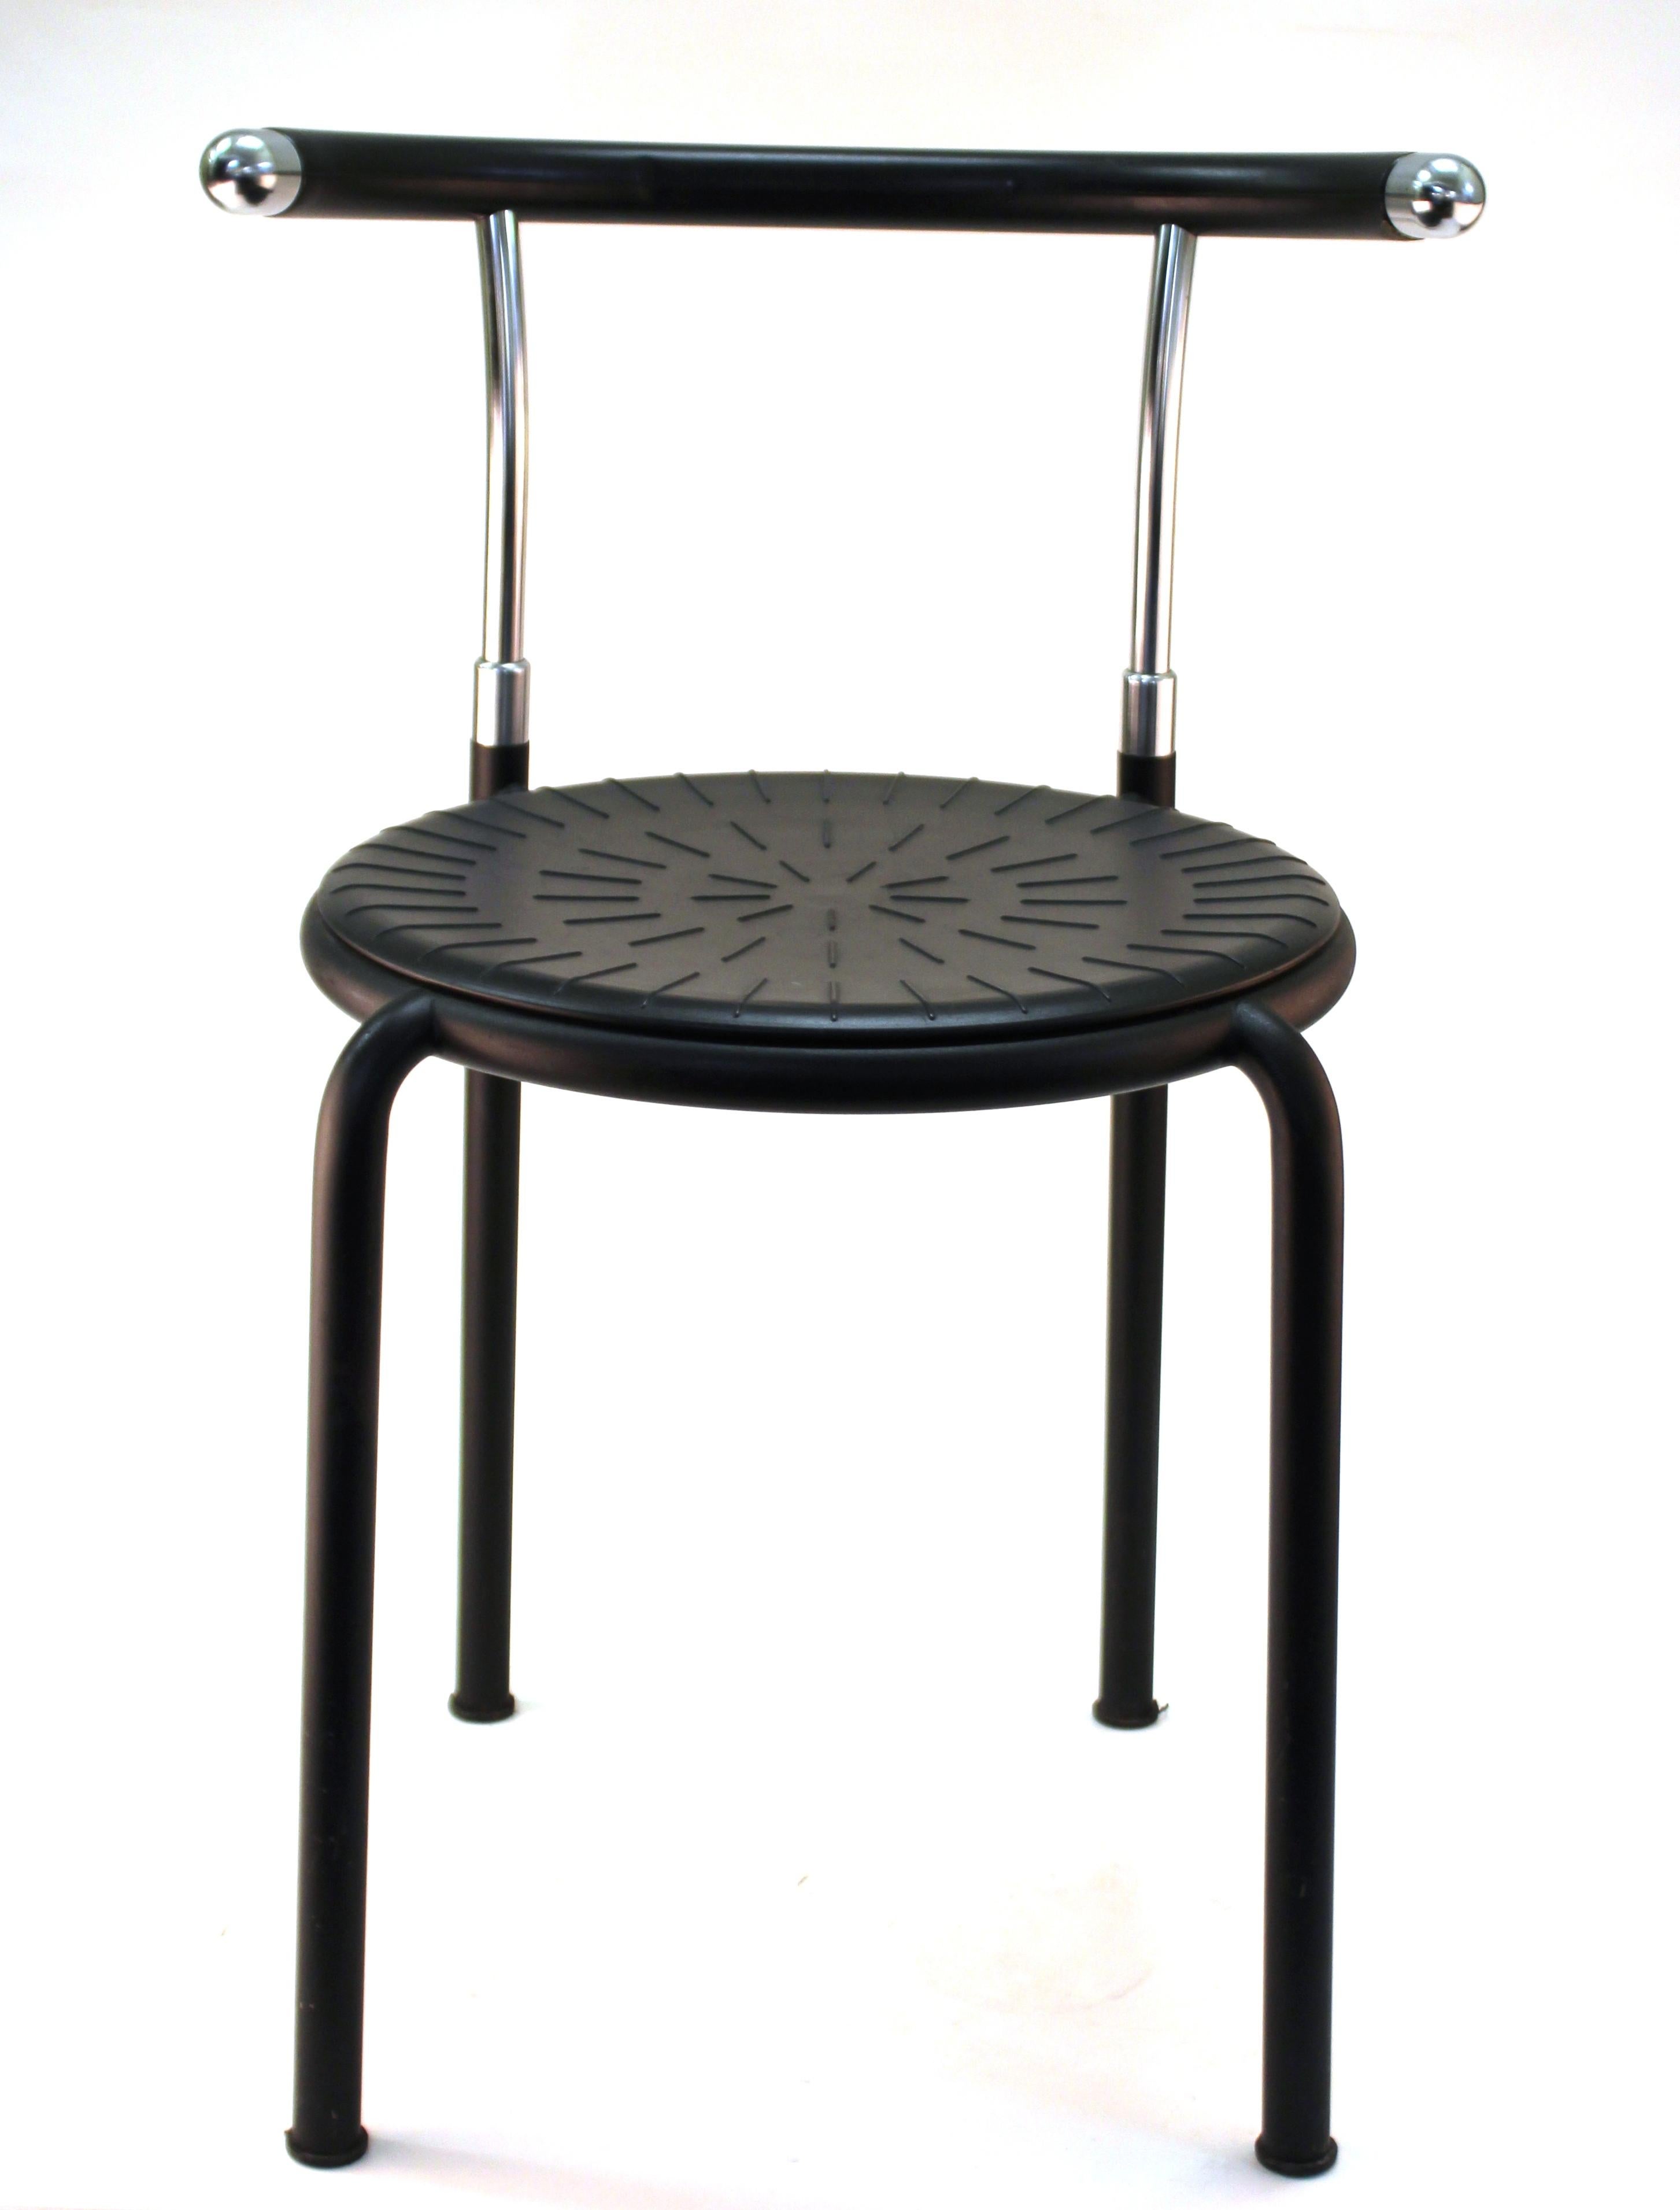 Danish Postmodern set of five dining chairs designed by Rud Thygesen and Johnny Sorensen for Botium. The set is made of metal frames with black plastic covers and was made in the 1980s in Denmark. In great vintage condition with some age-appropriate